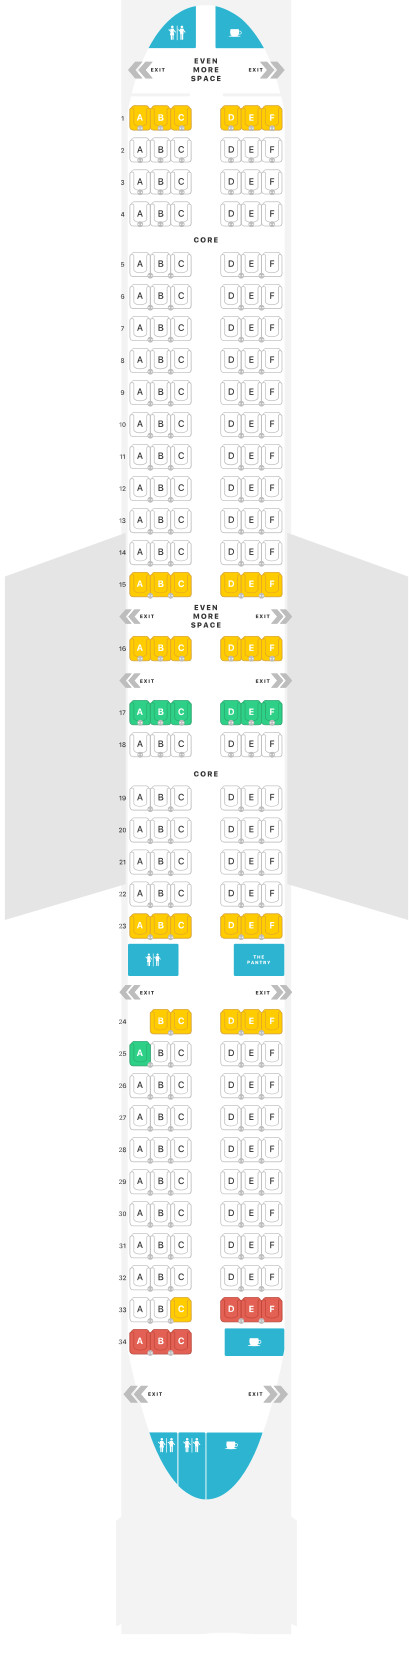 JetBlue-Airways-Airbus-A321neo-seat-map